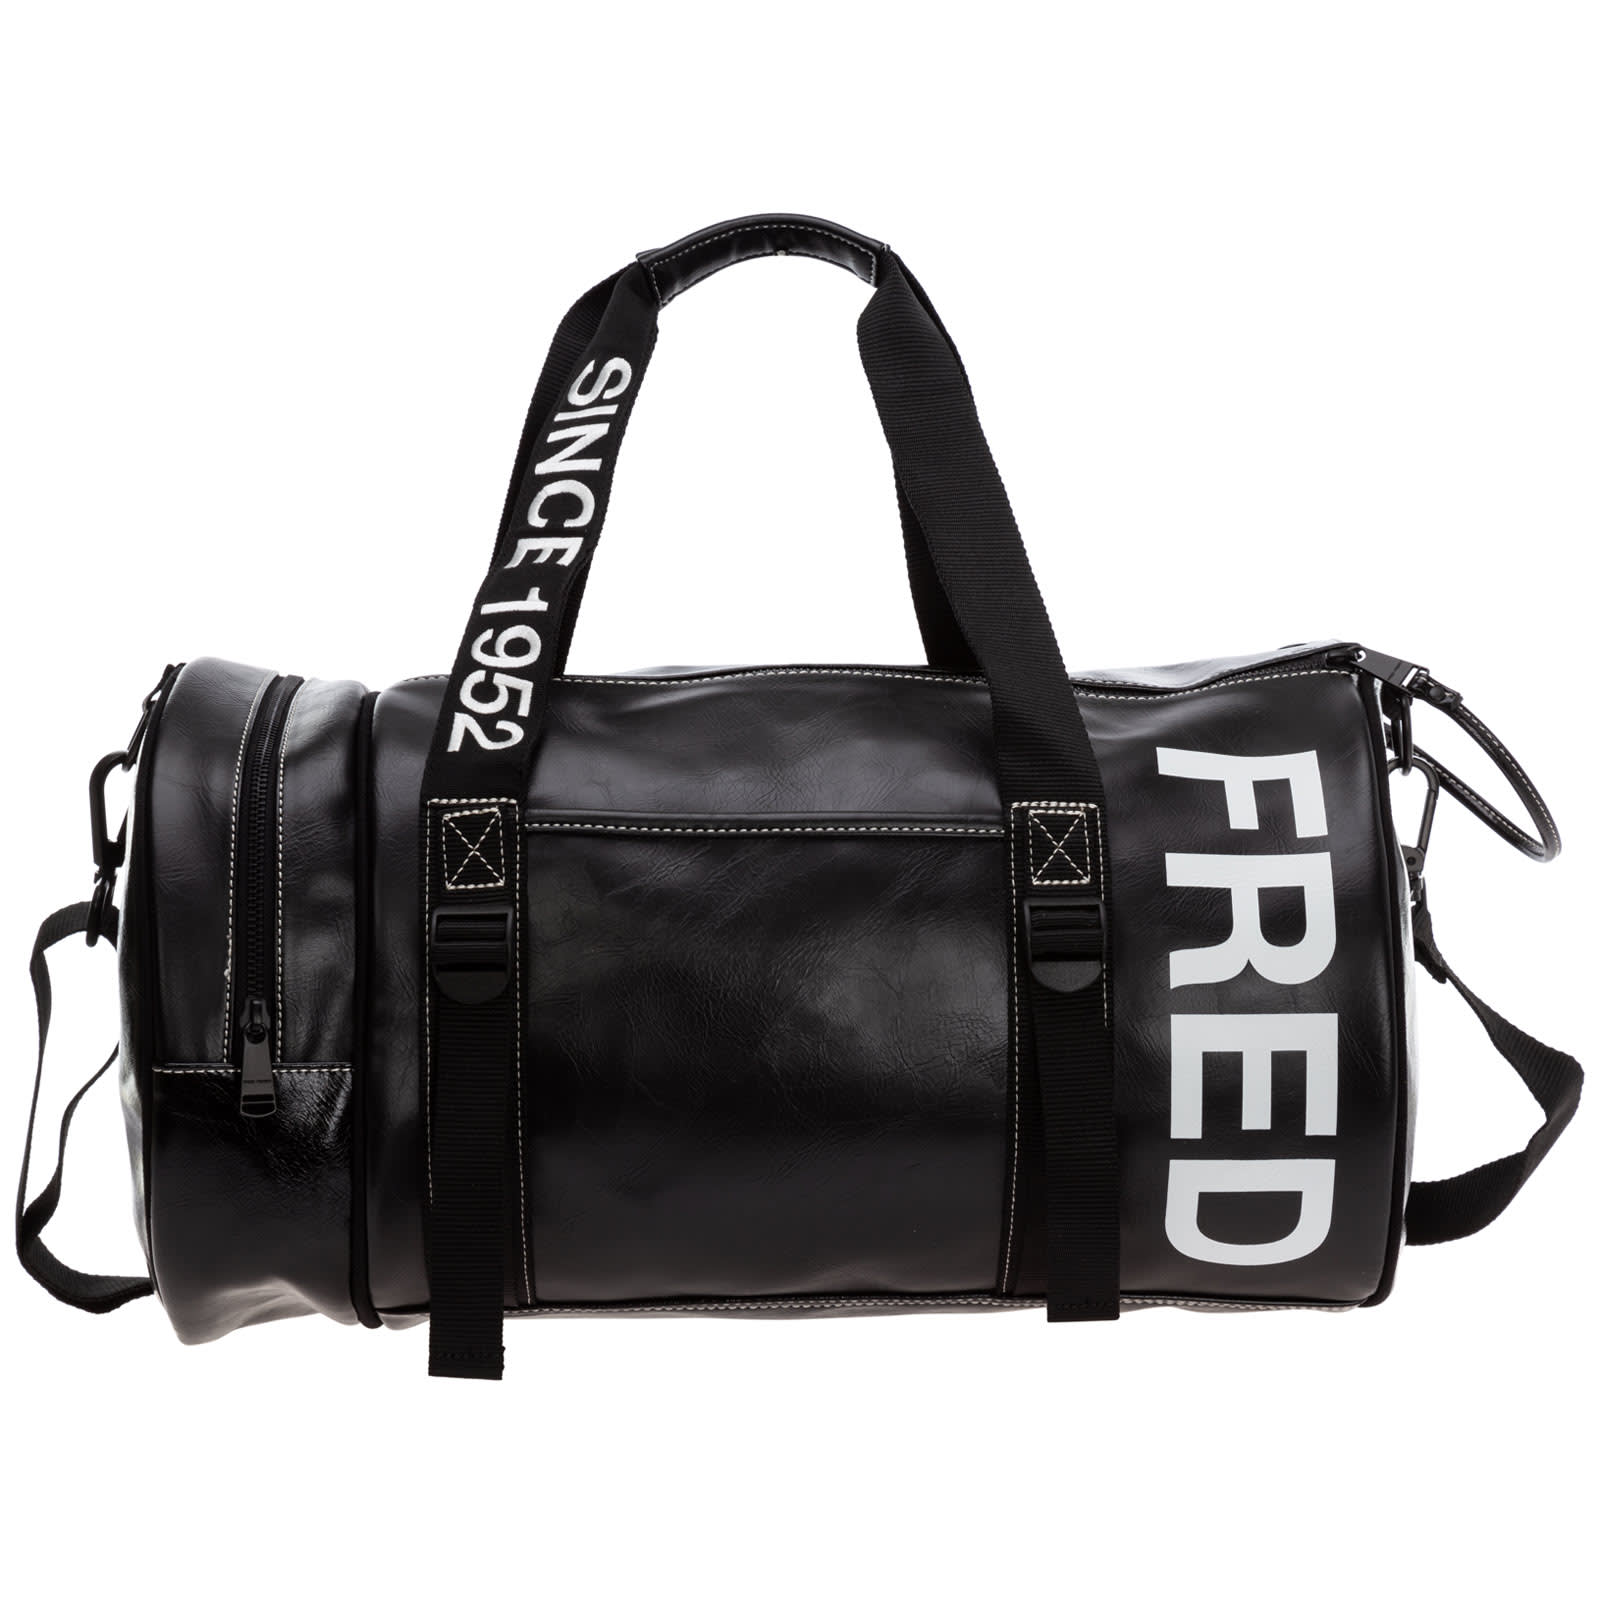 Fred Perry Canada Duffle Bag